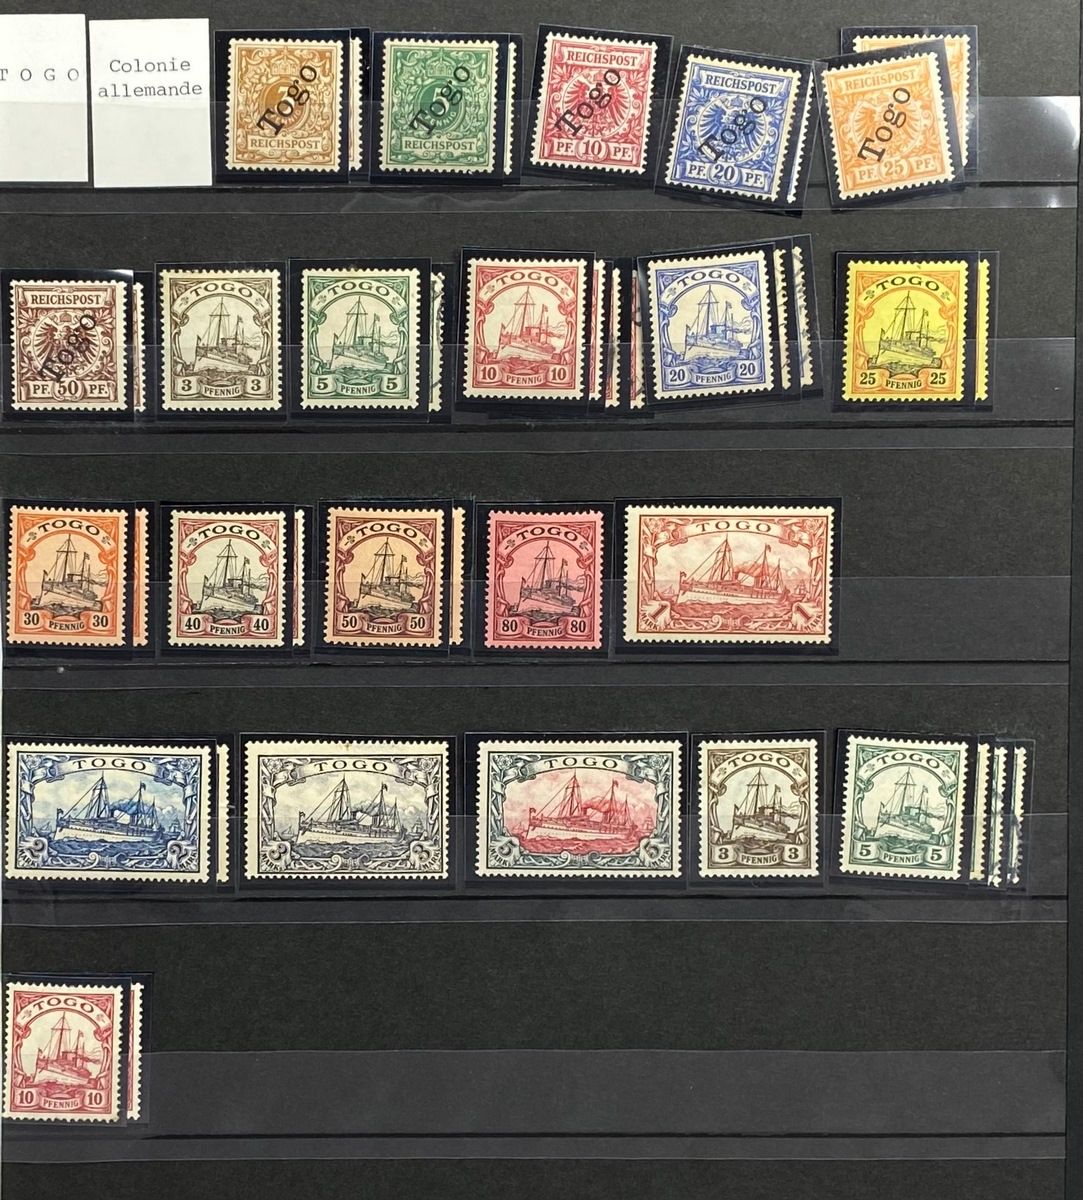 Null TOGO
Nice set, German colony, occupation stamps.